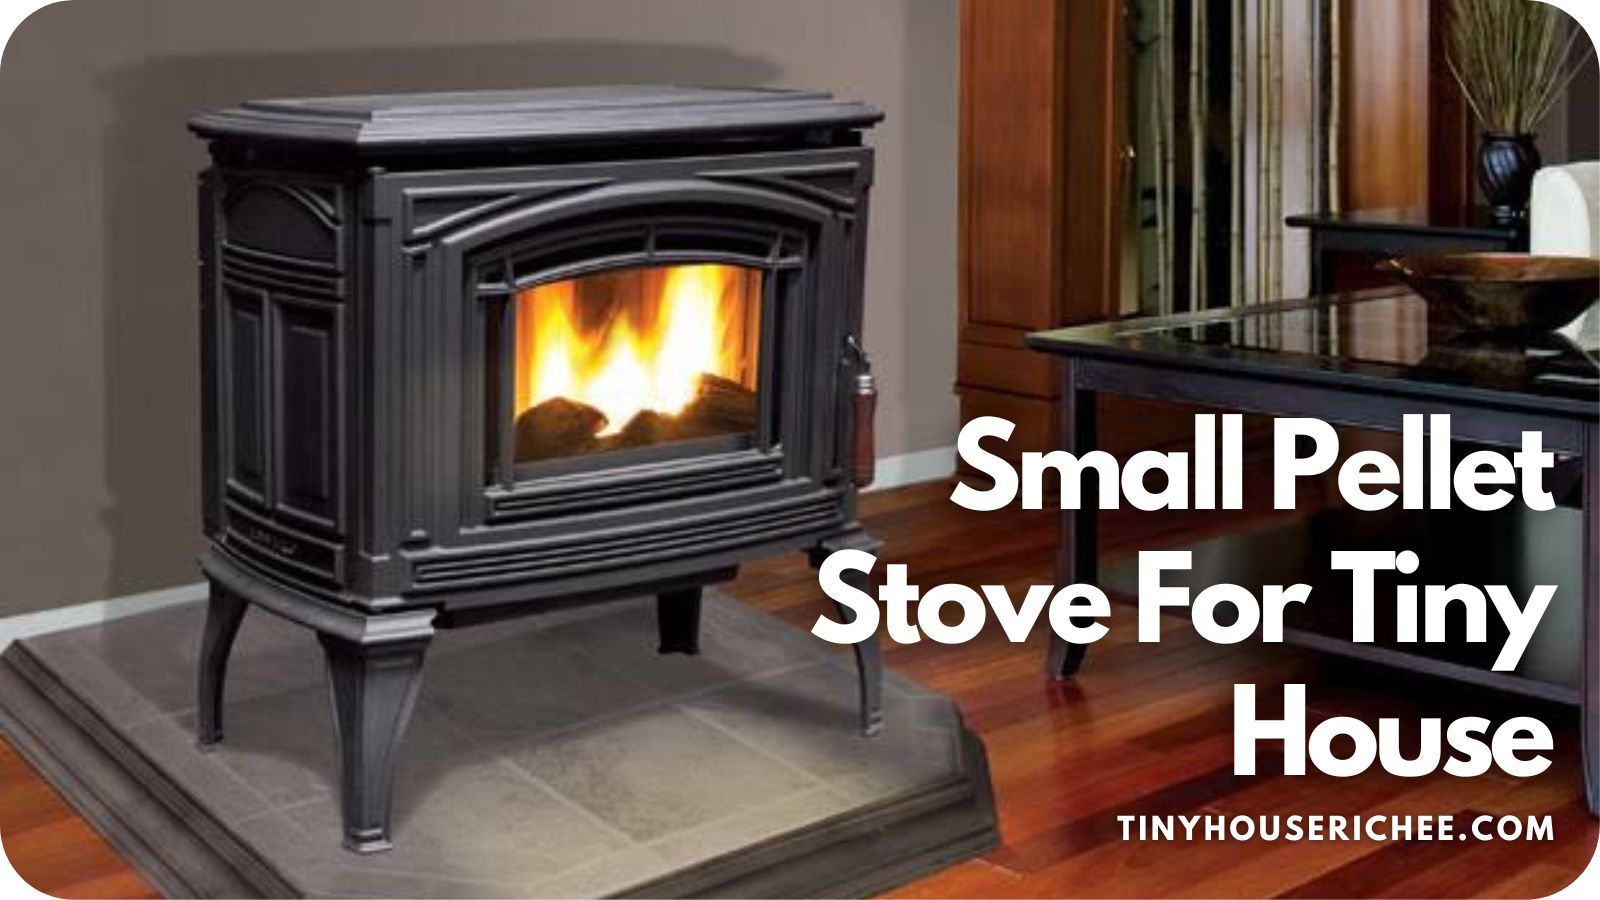 Small Pellet Stove For Tiny House